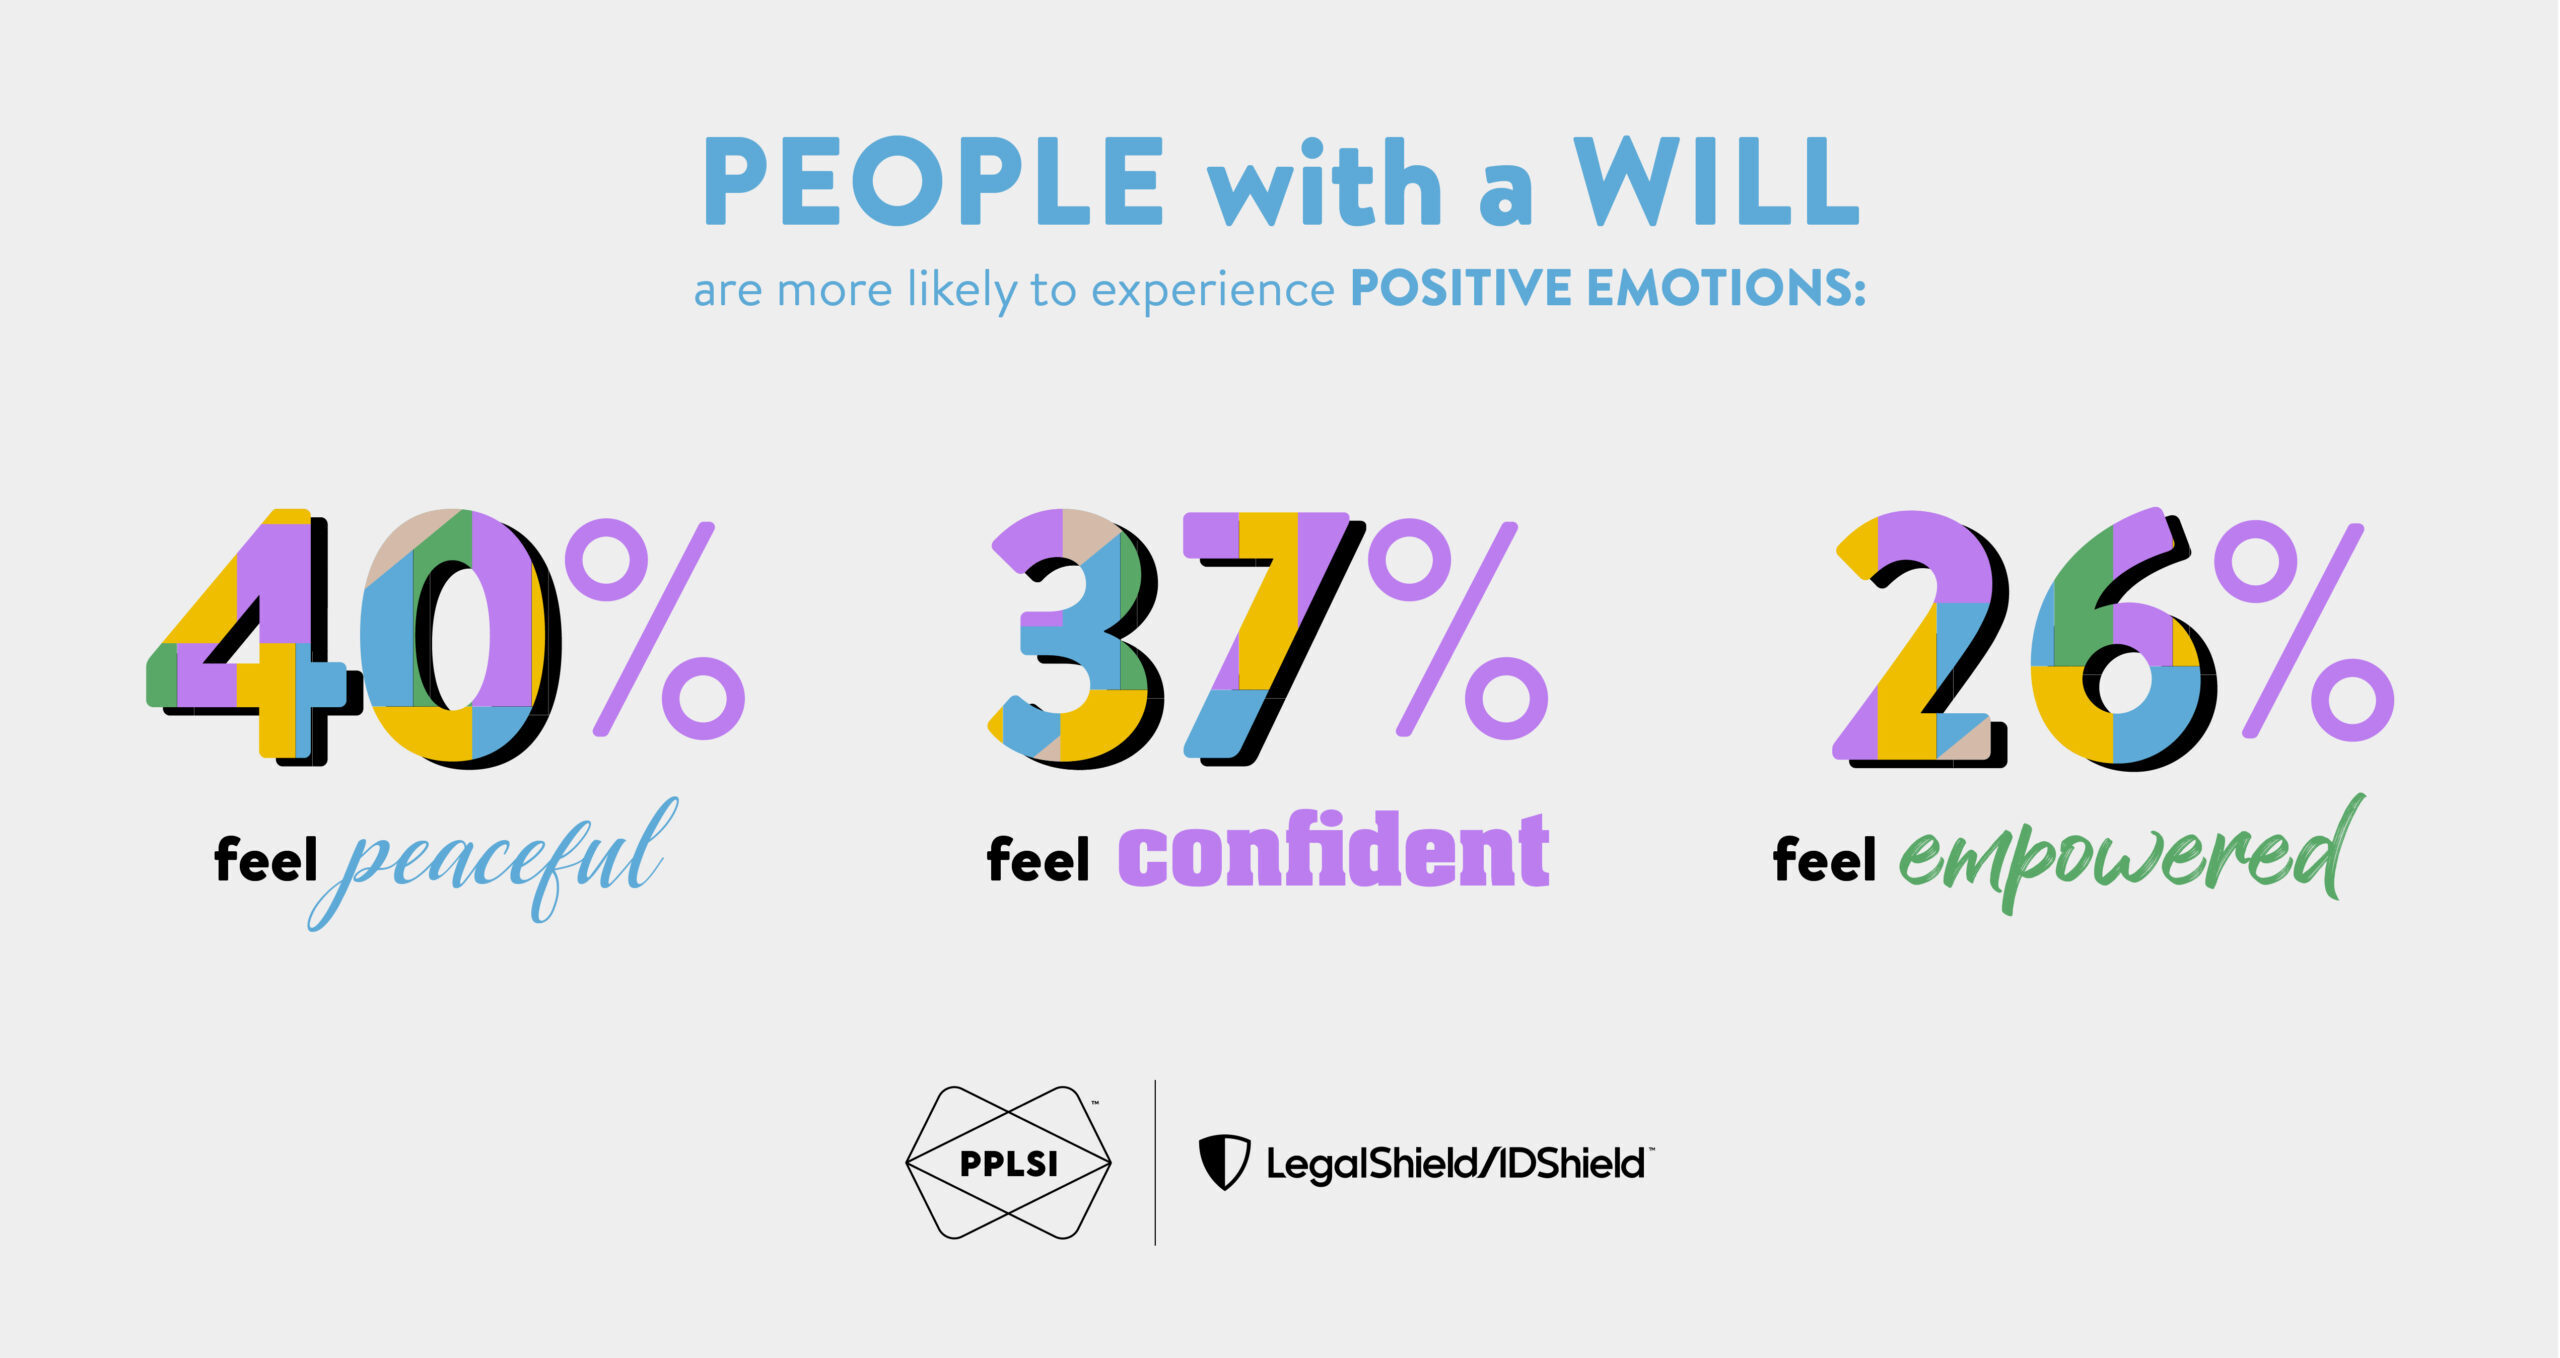 People with a Will are more likely to exprience positive emotions: 40% feel peaceful; 37% feel confident; and 26% feel empowered.